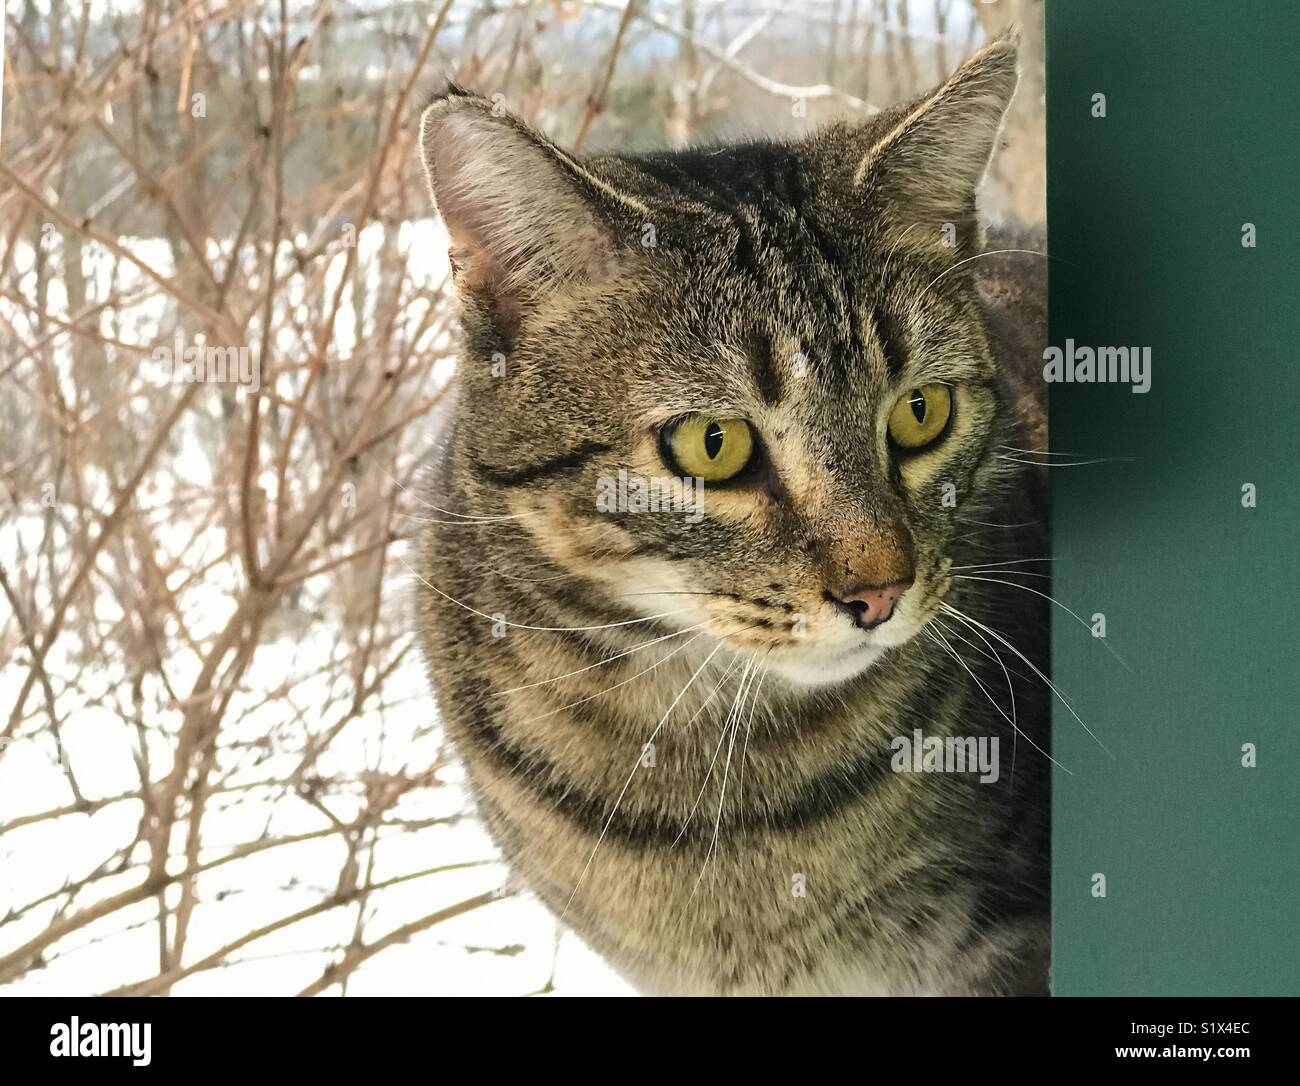 Hawkeye,male tabby, fixated on a bird feeder outside the frame of the photo, against a blurred out background. Stock Photo